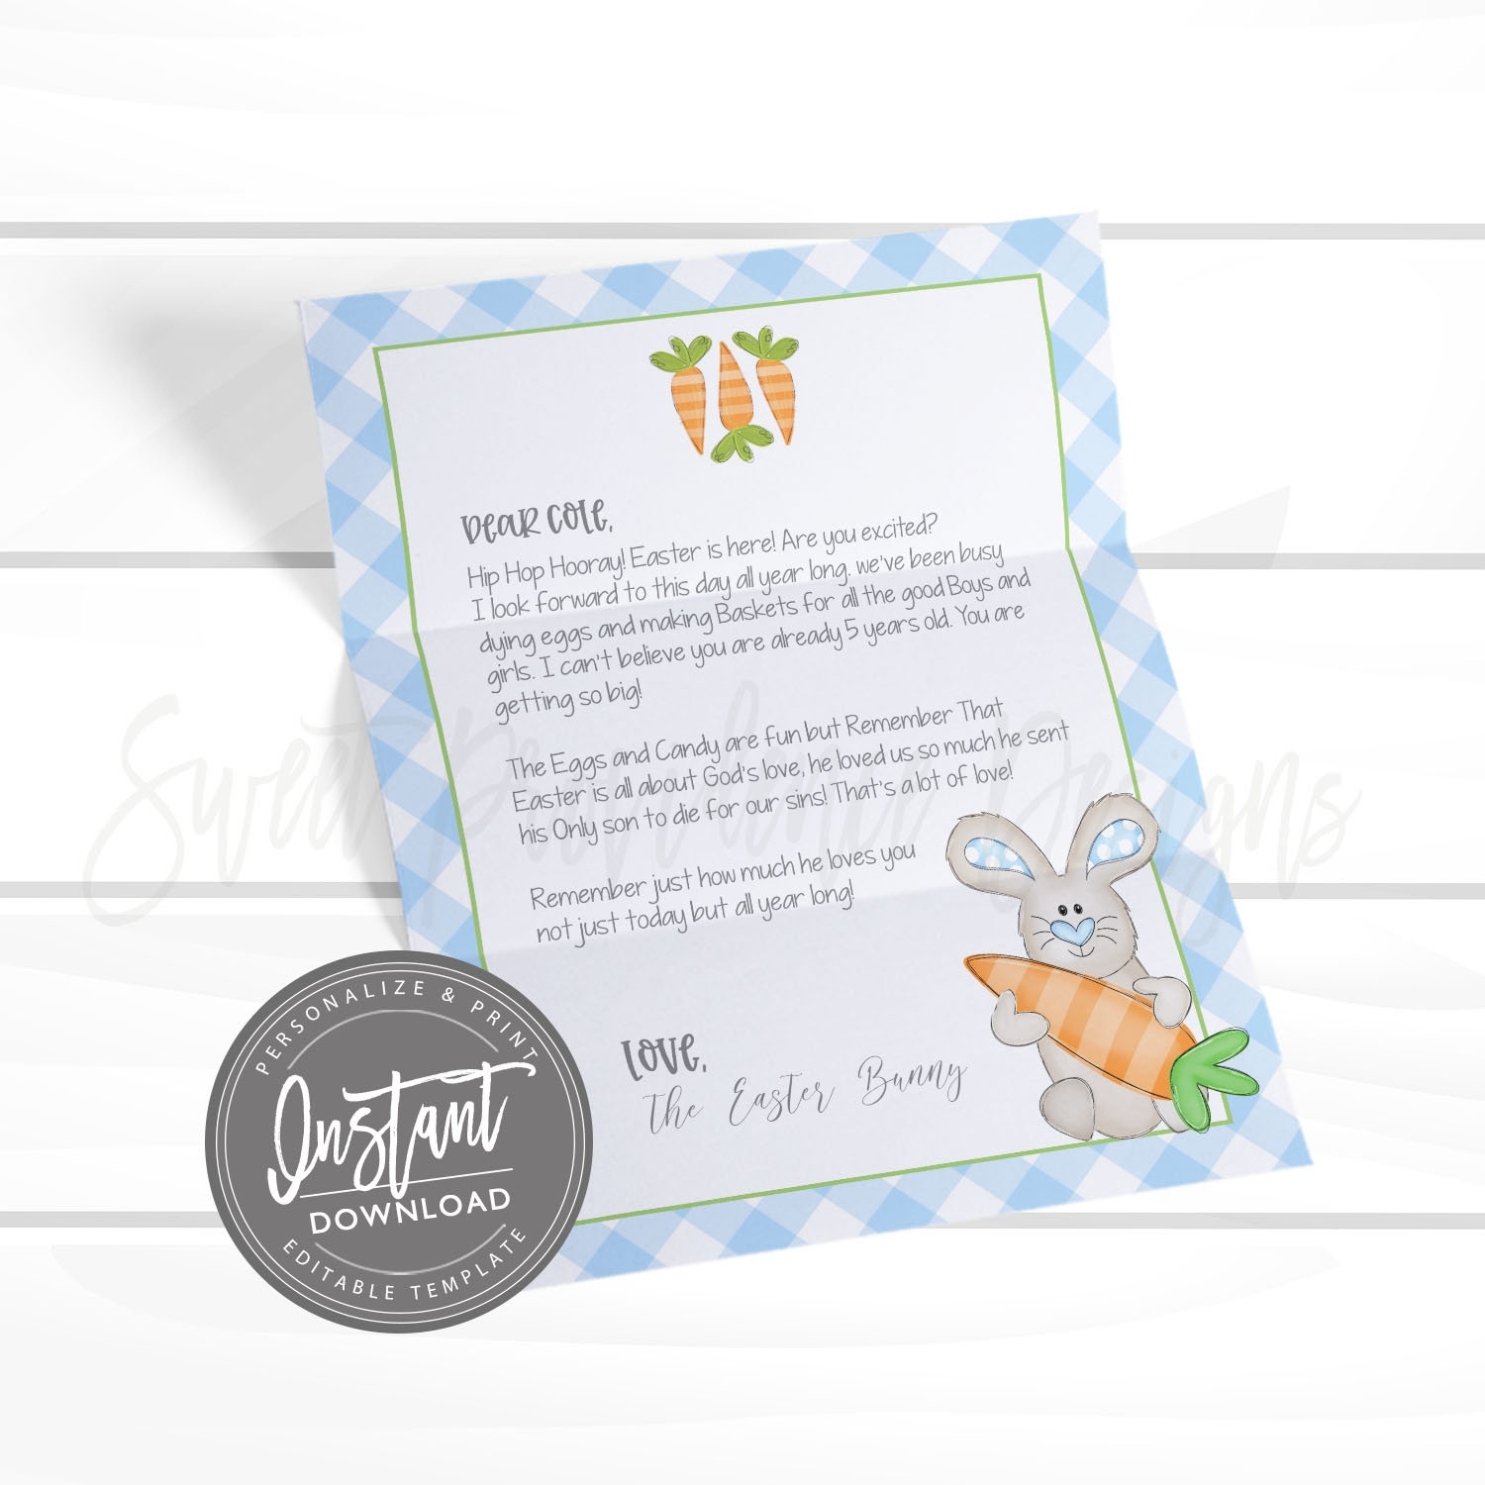 Editable Easter Bunny Letter | Sweet Providence Designs within Letter To Easter Bunny Template